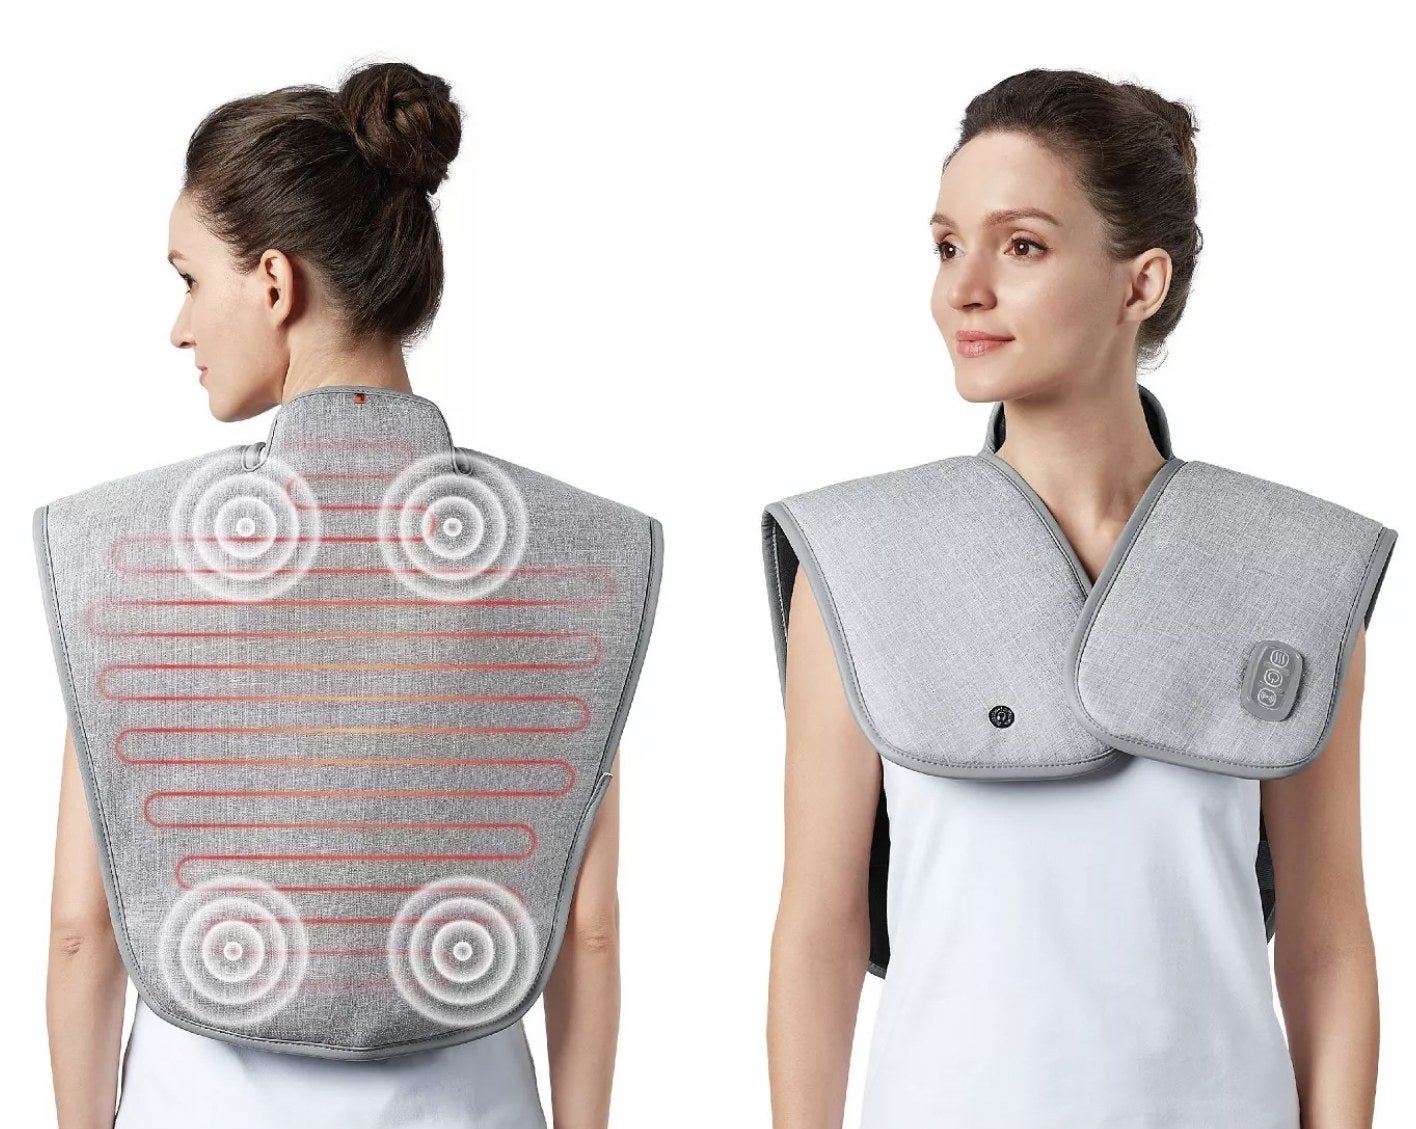 Model wearing the pad over her upper back and shoulders with designs showing the heating and massage elements inside the wrap